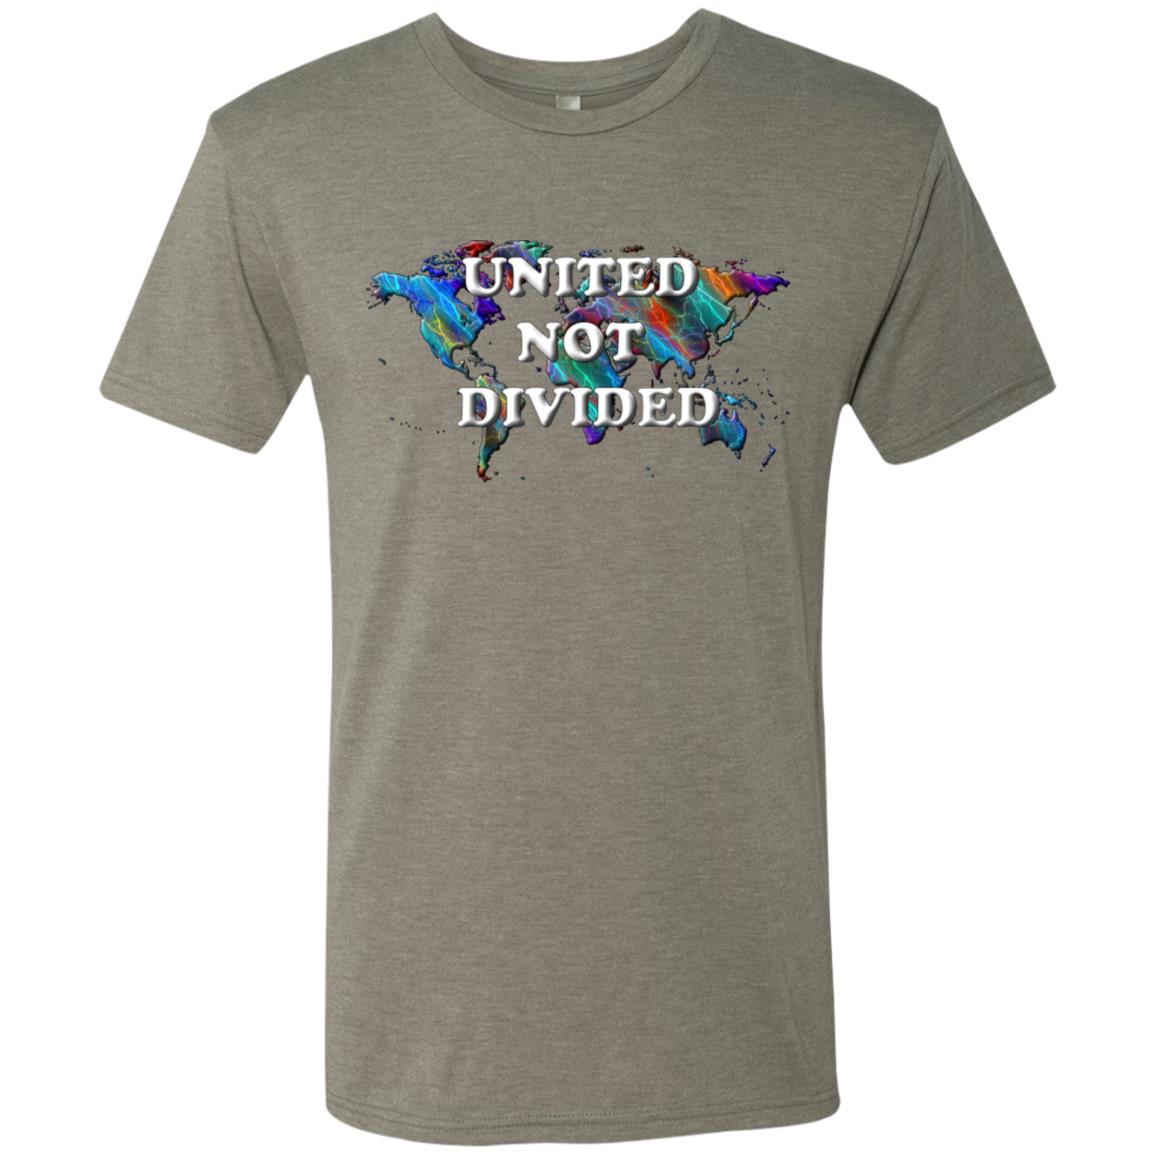 United Not Divided Statement T-Shirt (World)